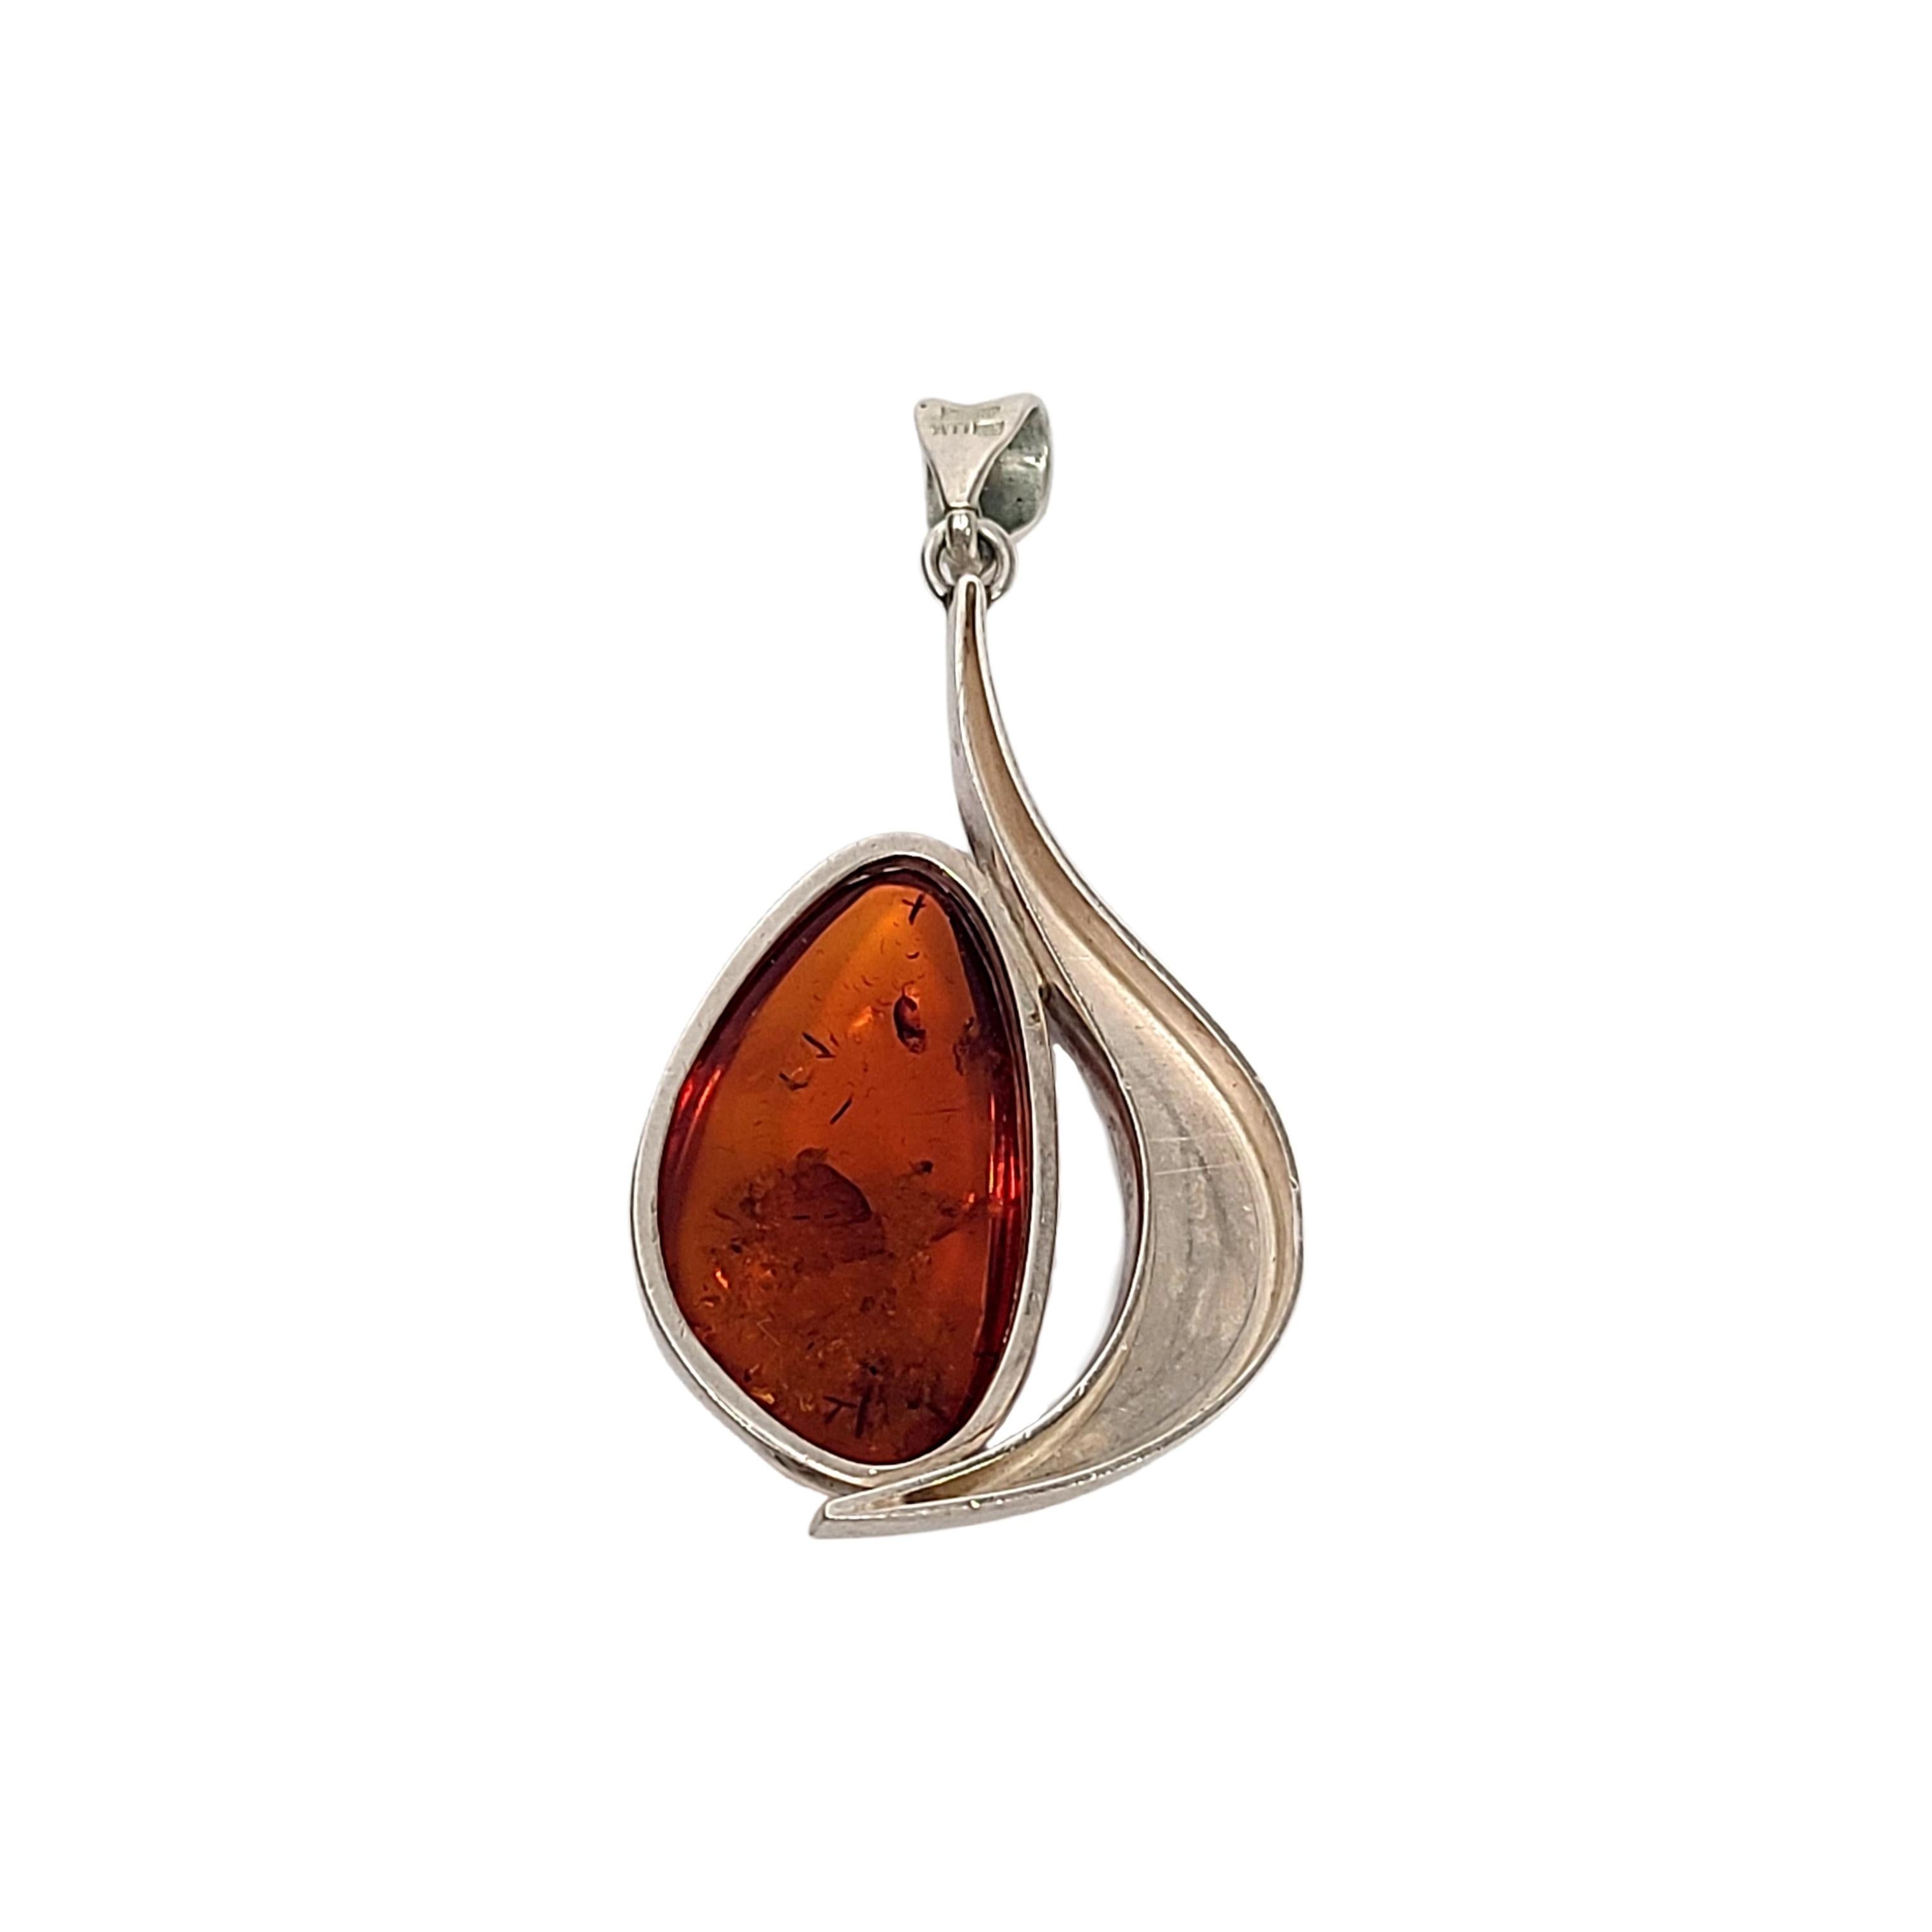 Sterling silver amber pendan by ATI Poland.

Large amber stone set in a modernist design pendant by designer ATI of Poland.

Measures approx 2 1/2